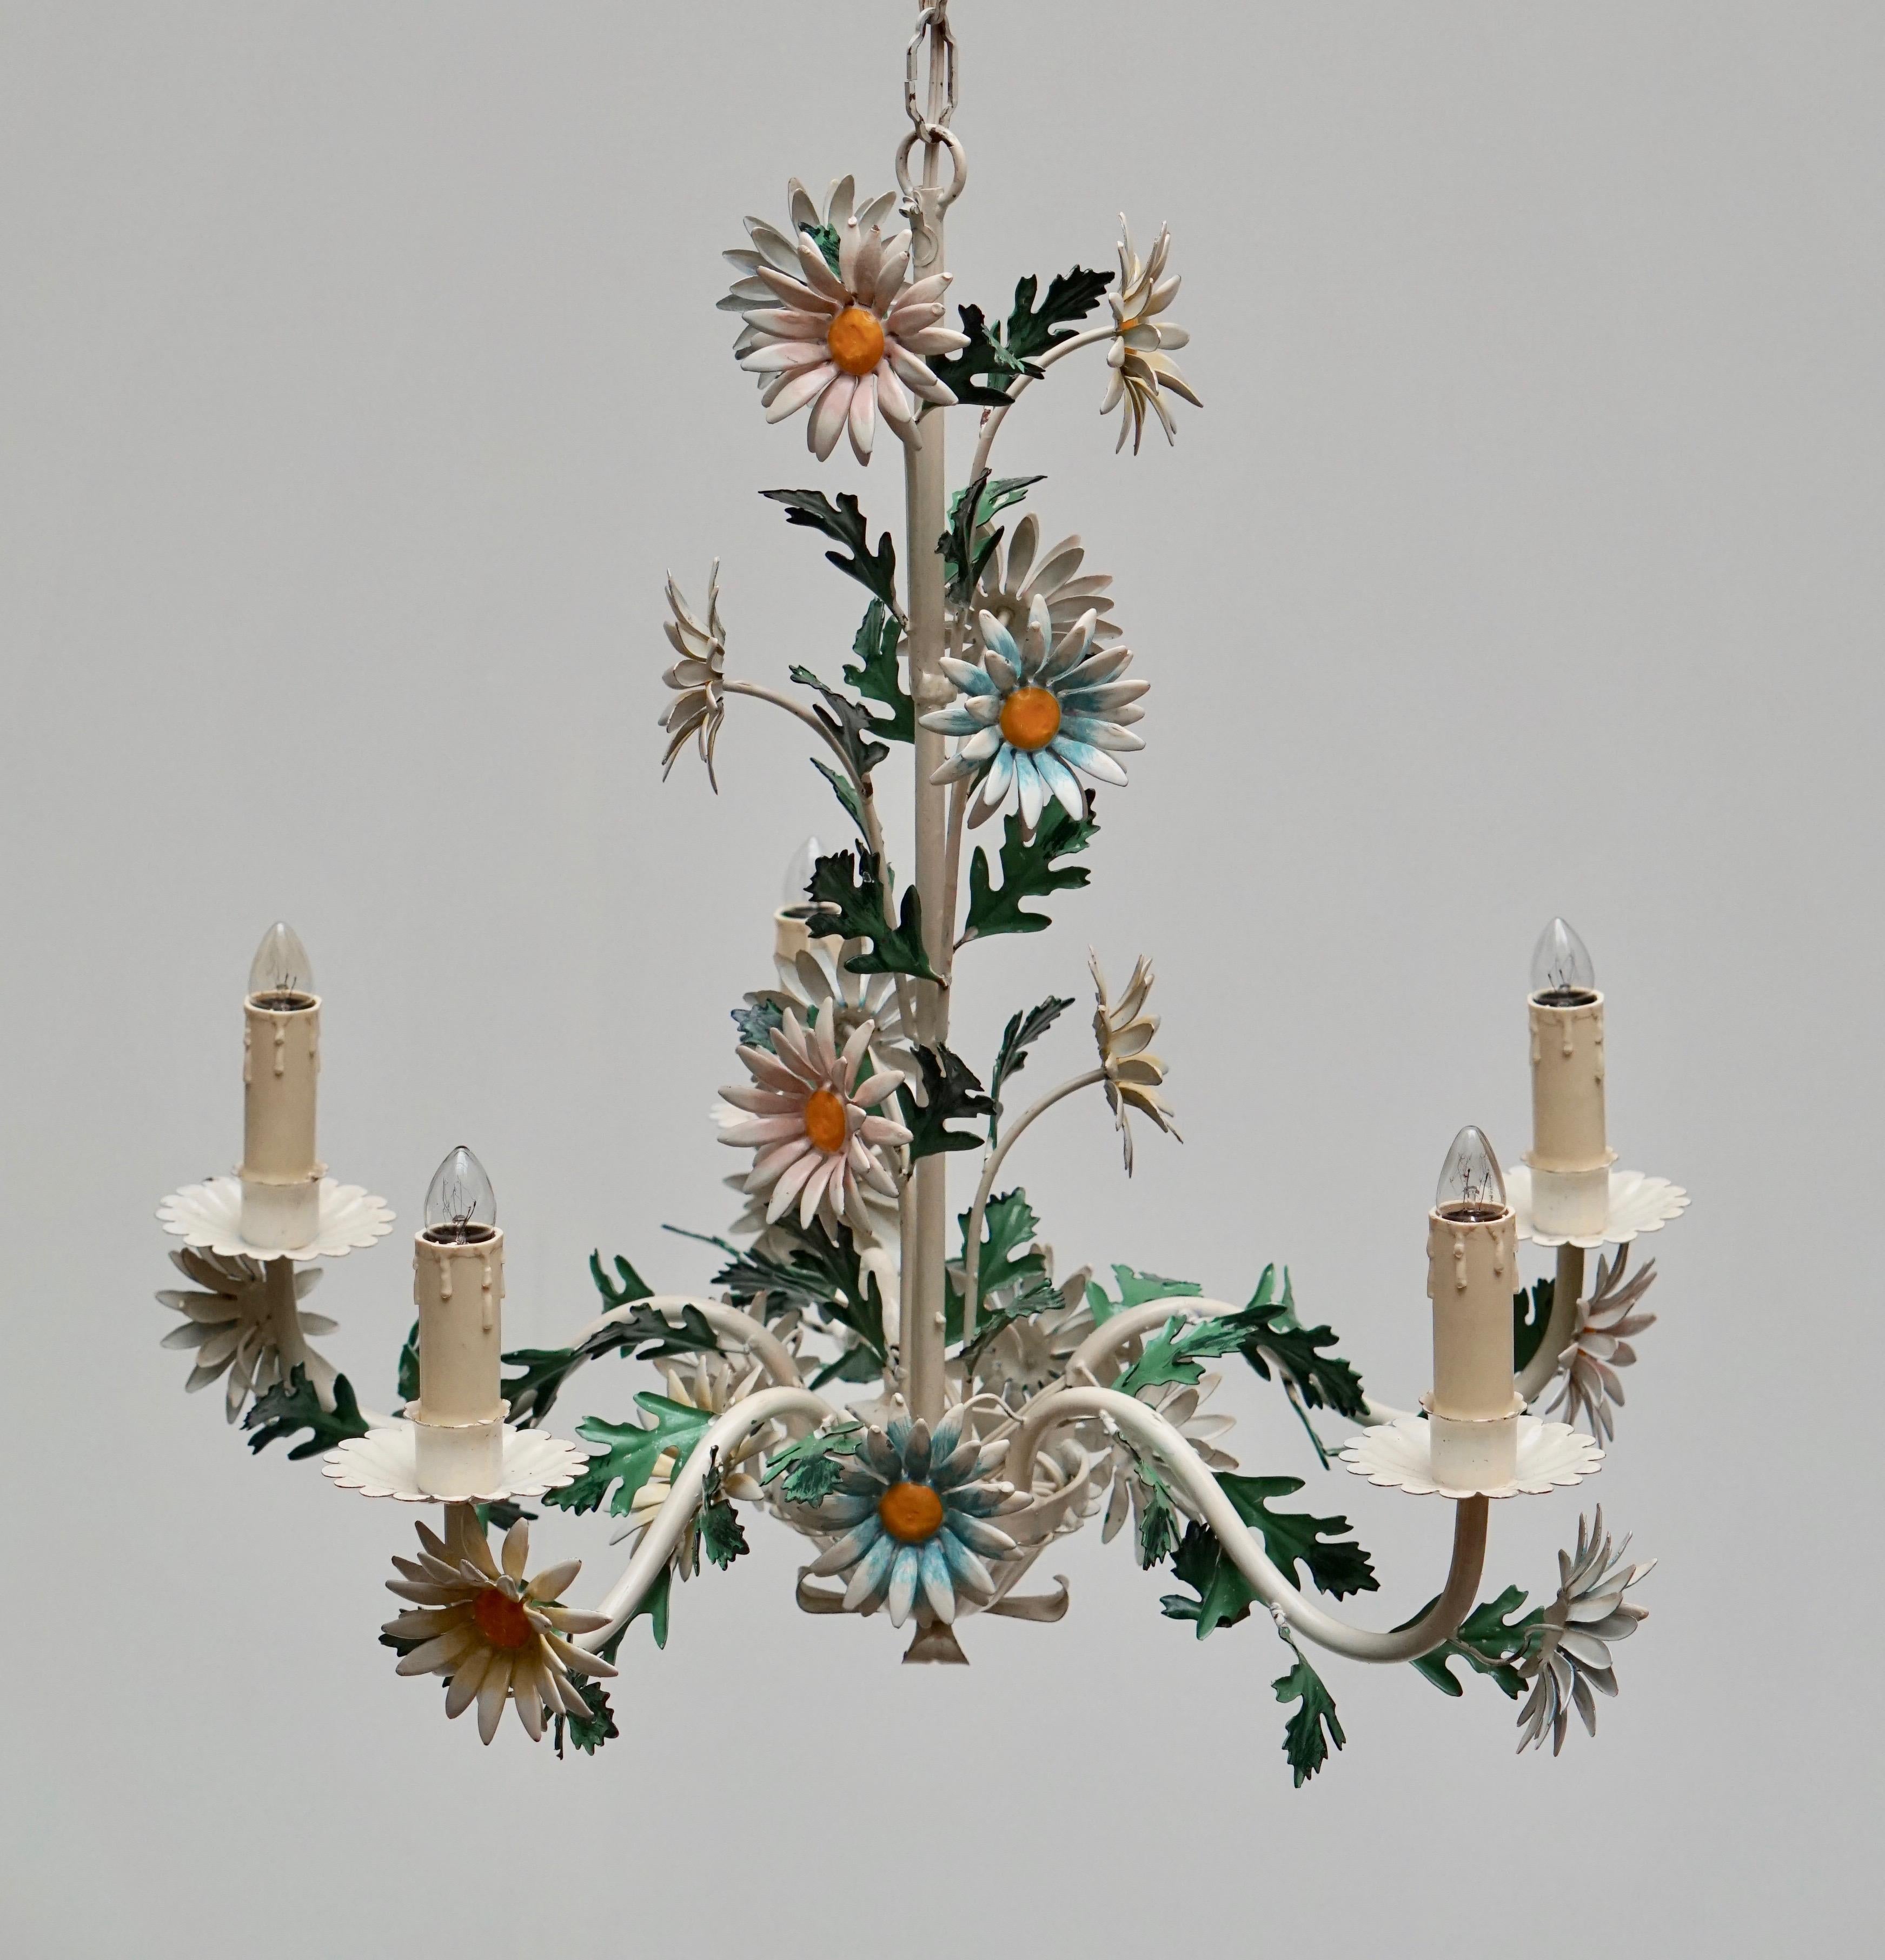 Mid-20th Century Italian Painted Iron and Tole Chandelier with Flowers 11